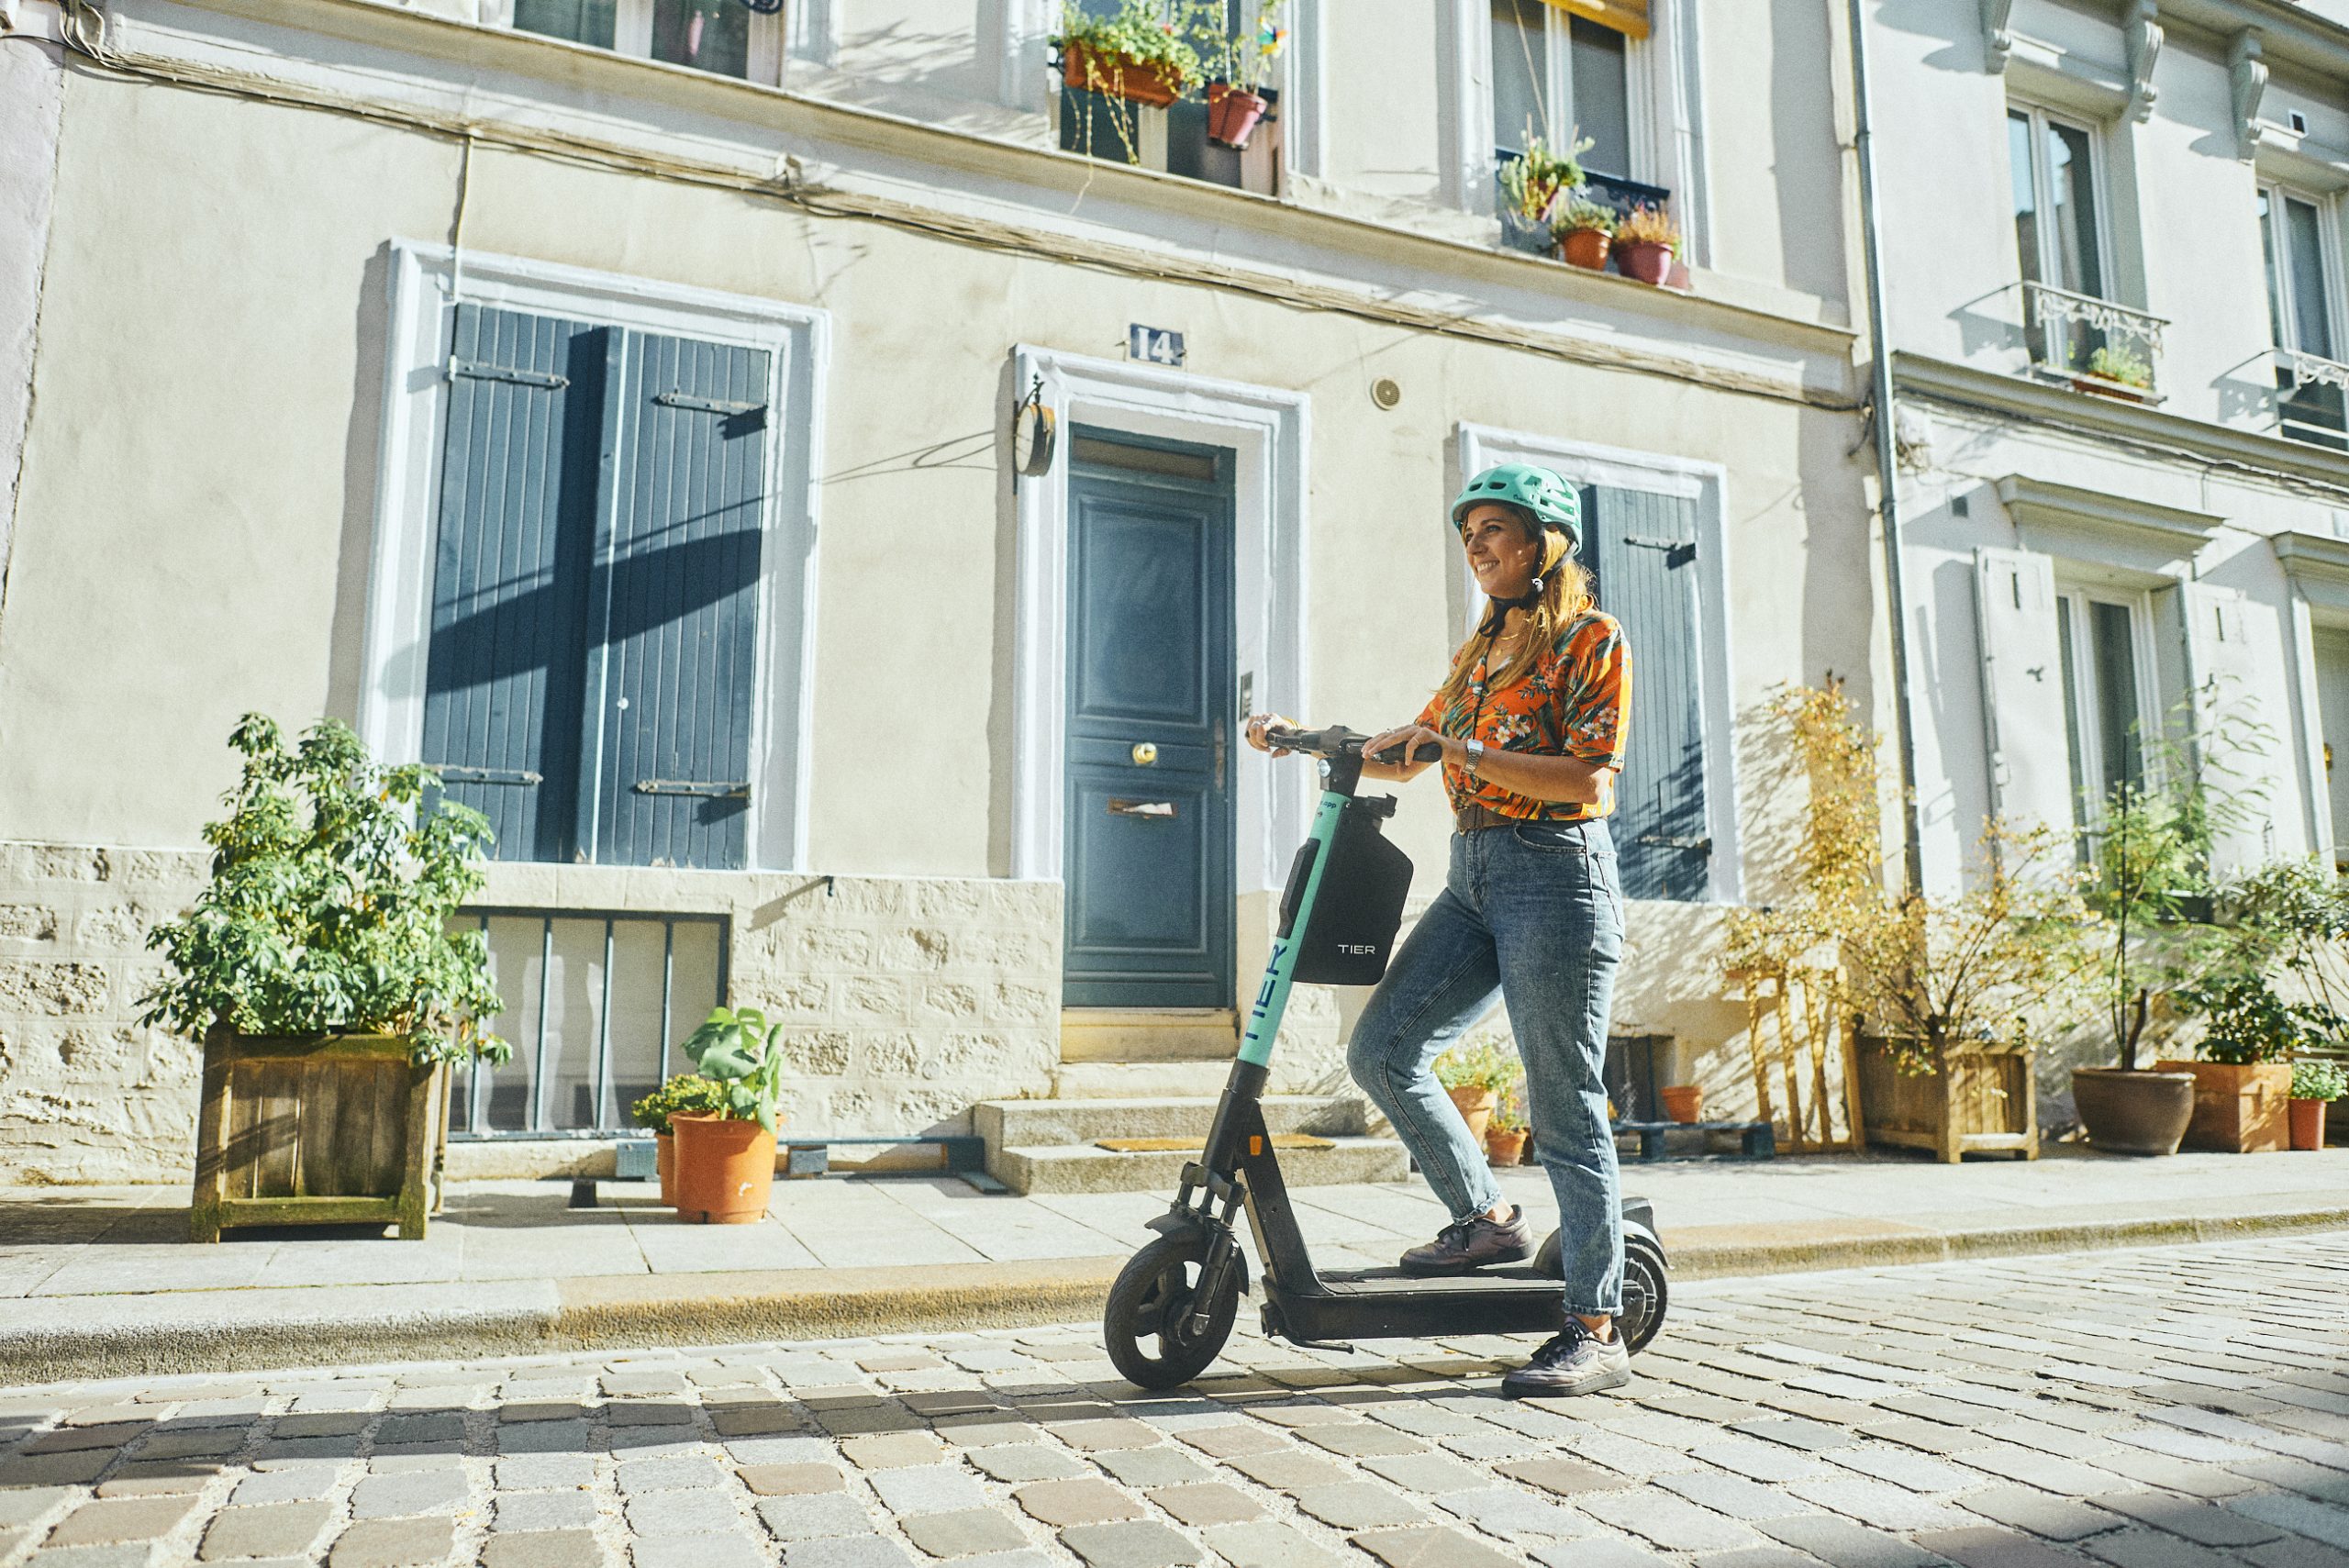 Tier, Dott to form Europe's largest e-scooter rental firm